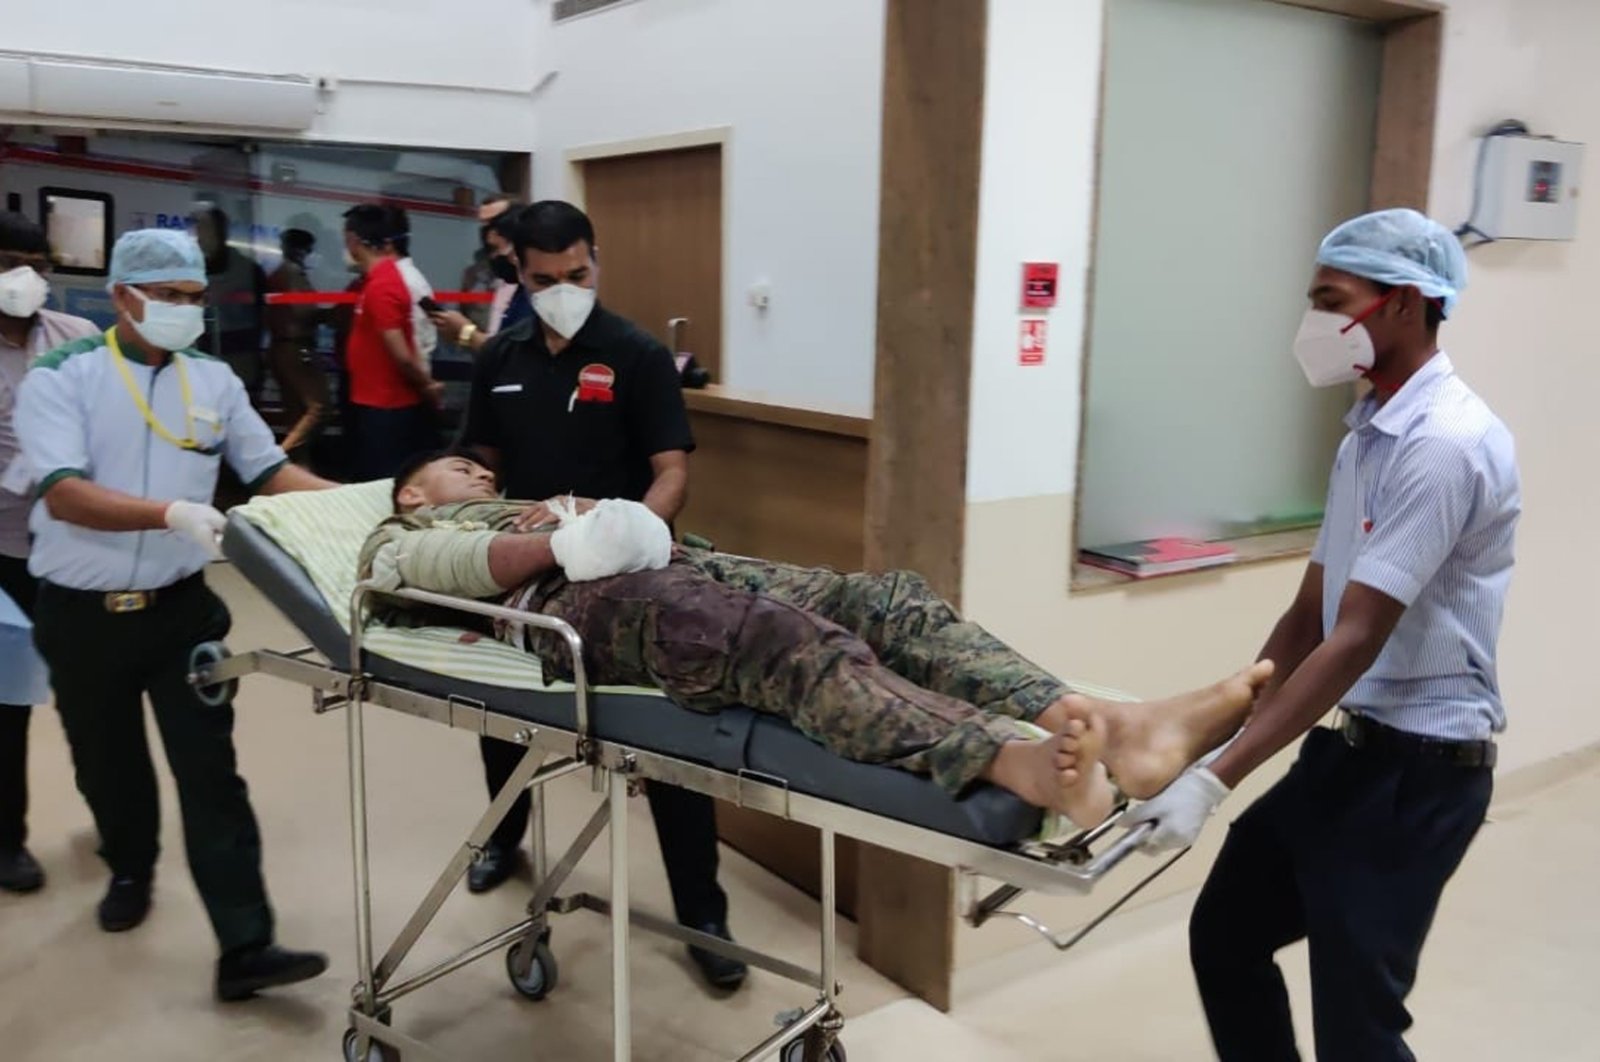 A paramilitary soldier injured in a gunbattle with Maoist rebels Saturday is brought for treatment at a hospital in Raipur, India, April 4, 2021. (AP Photo)